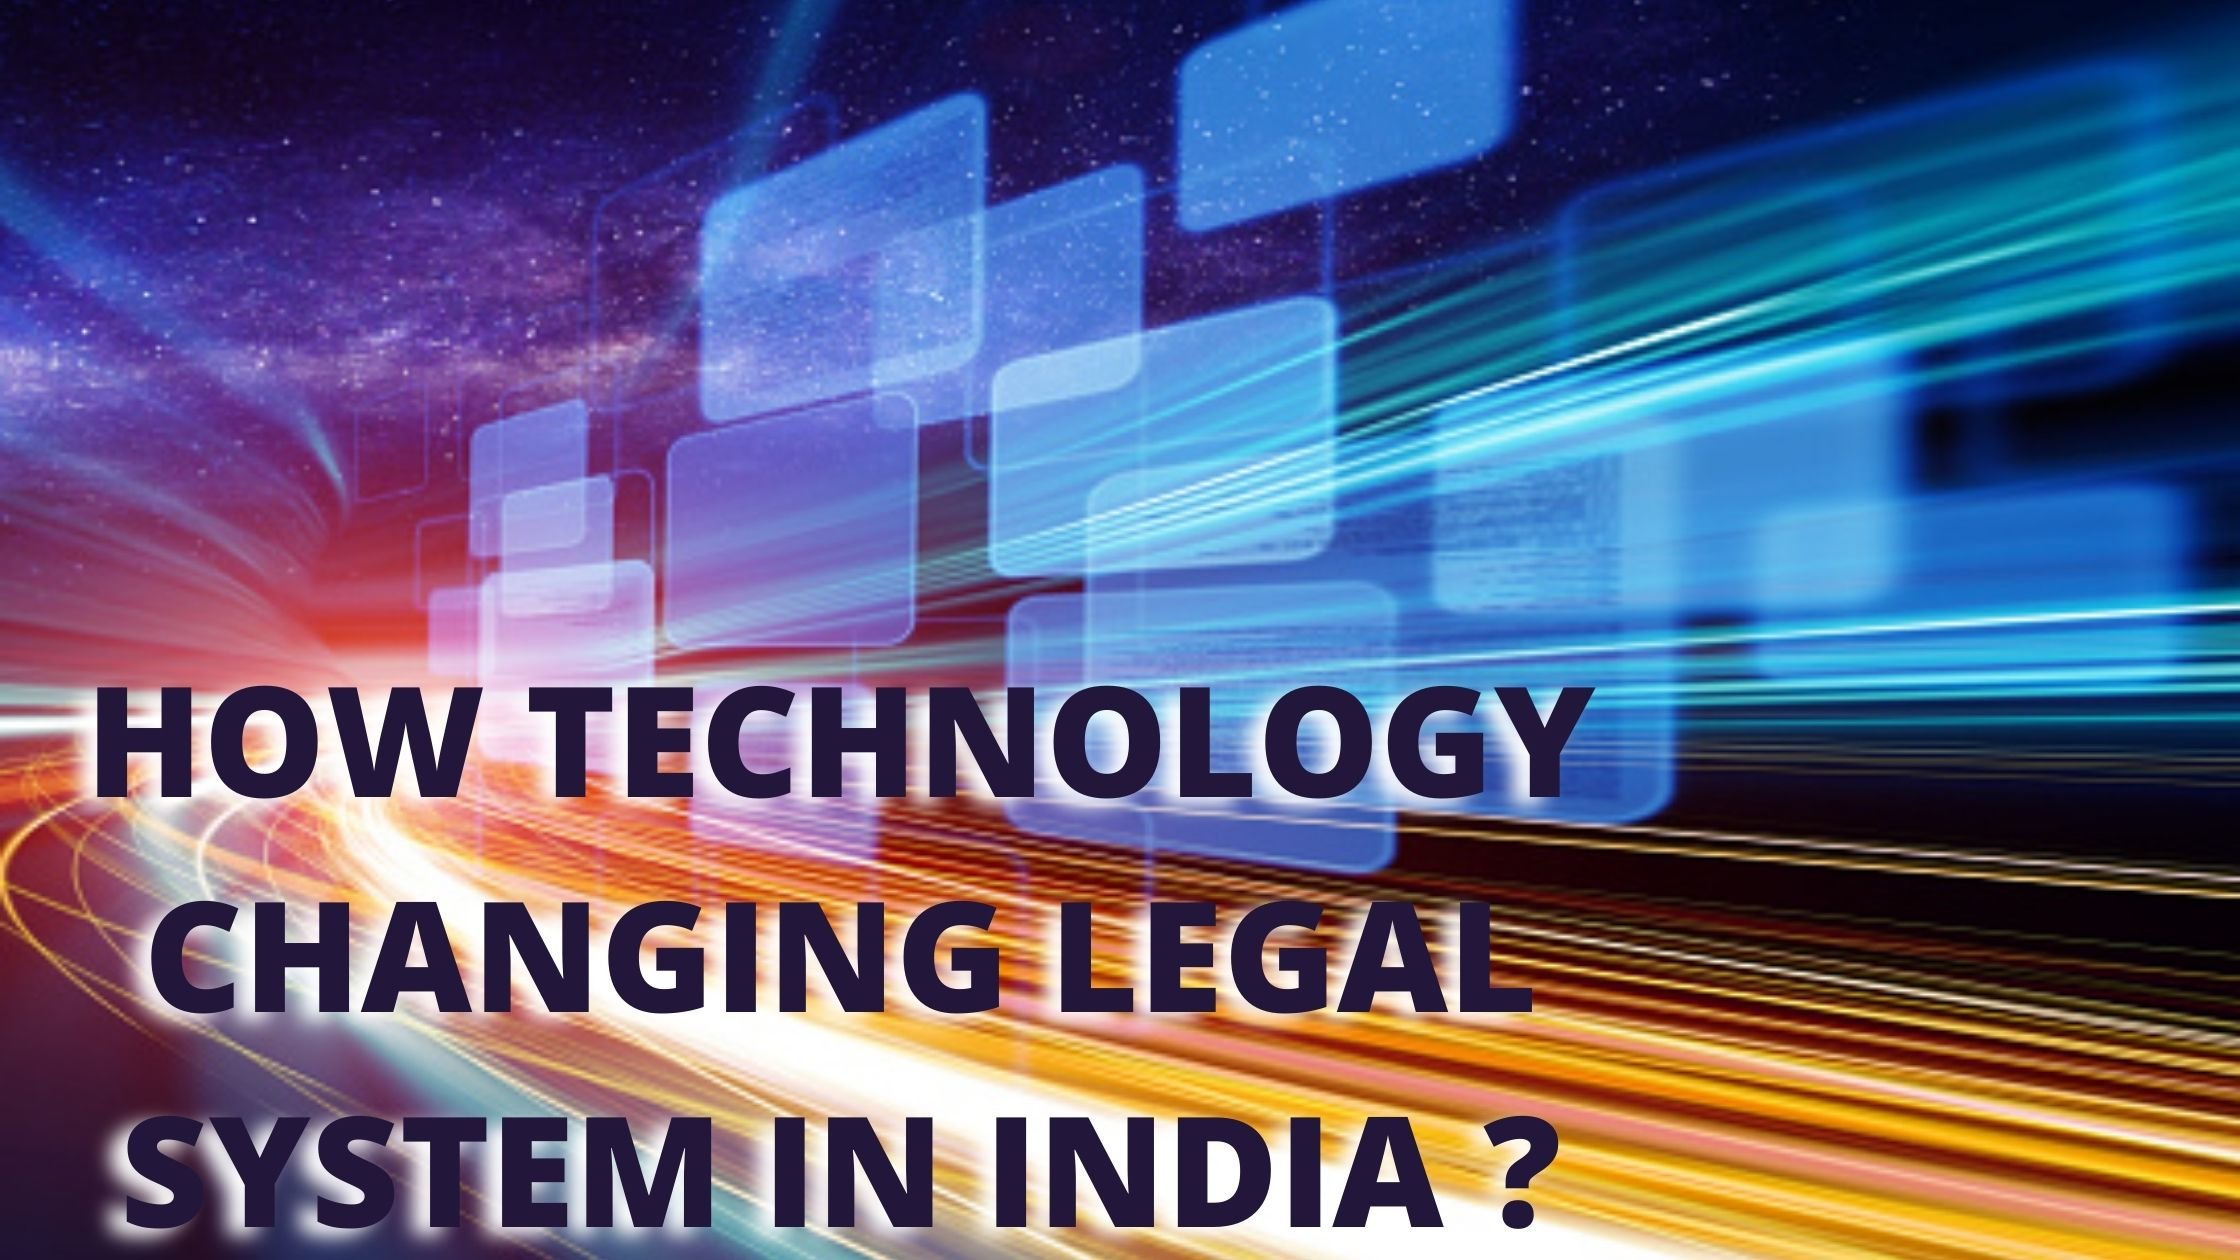 How is Technology changing the Legal System in India?